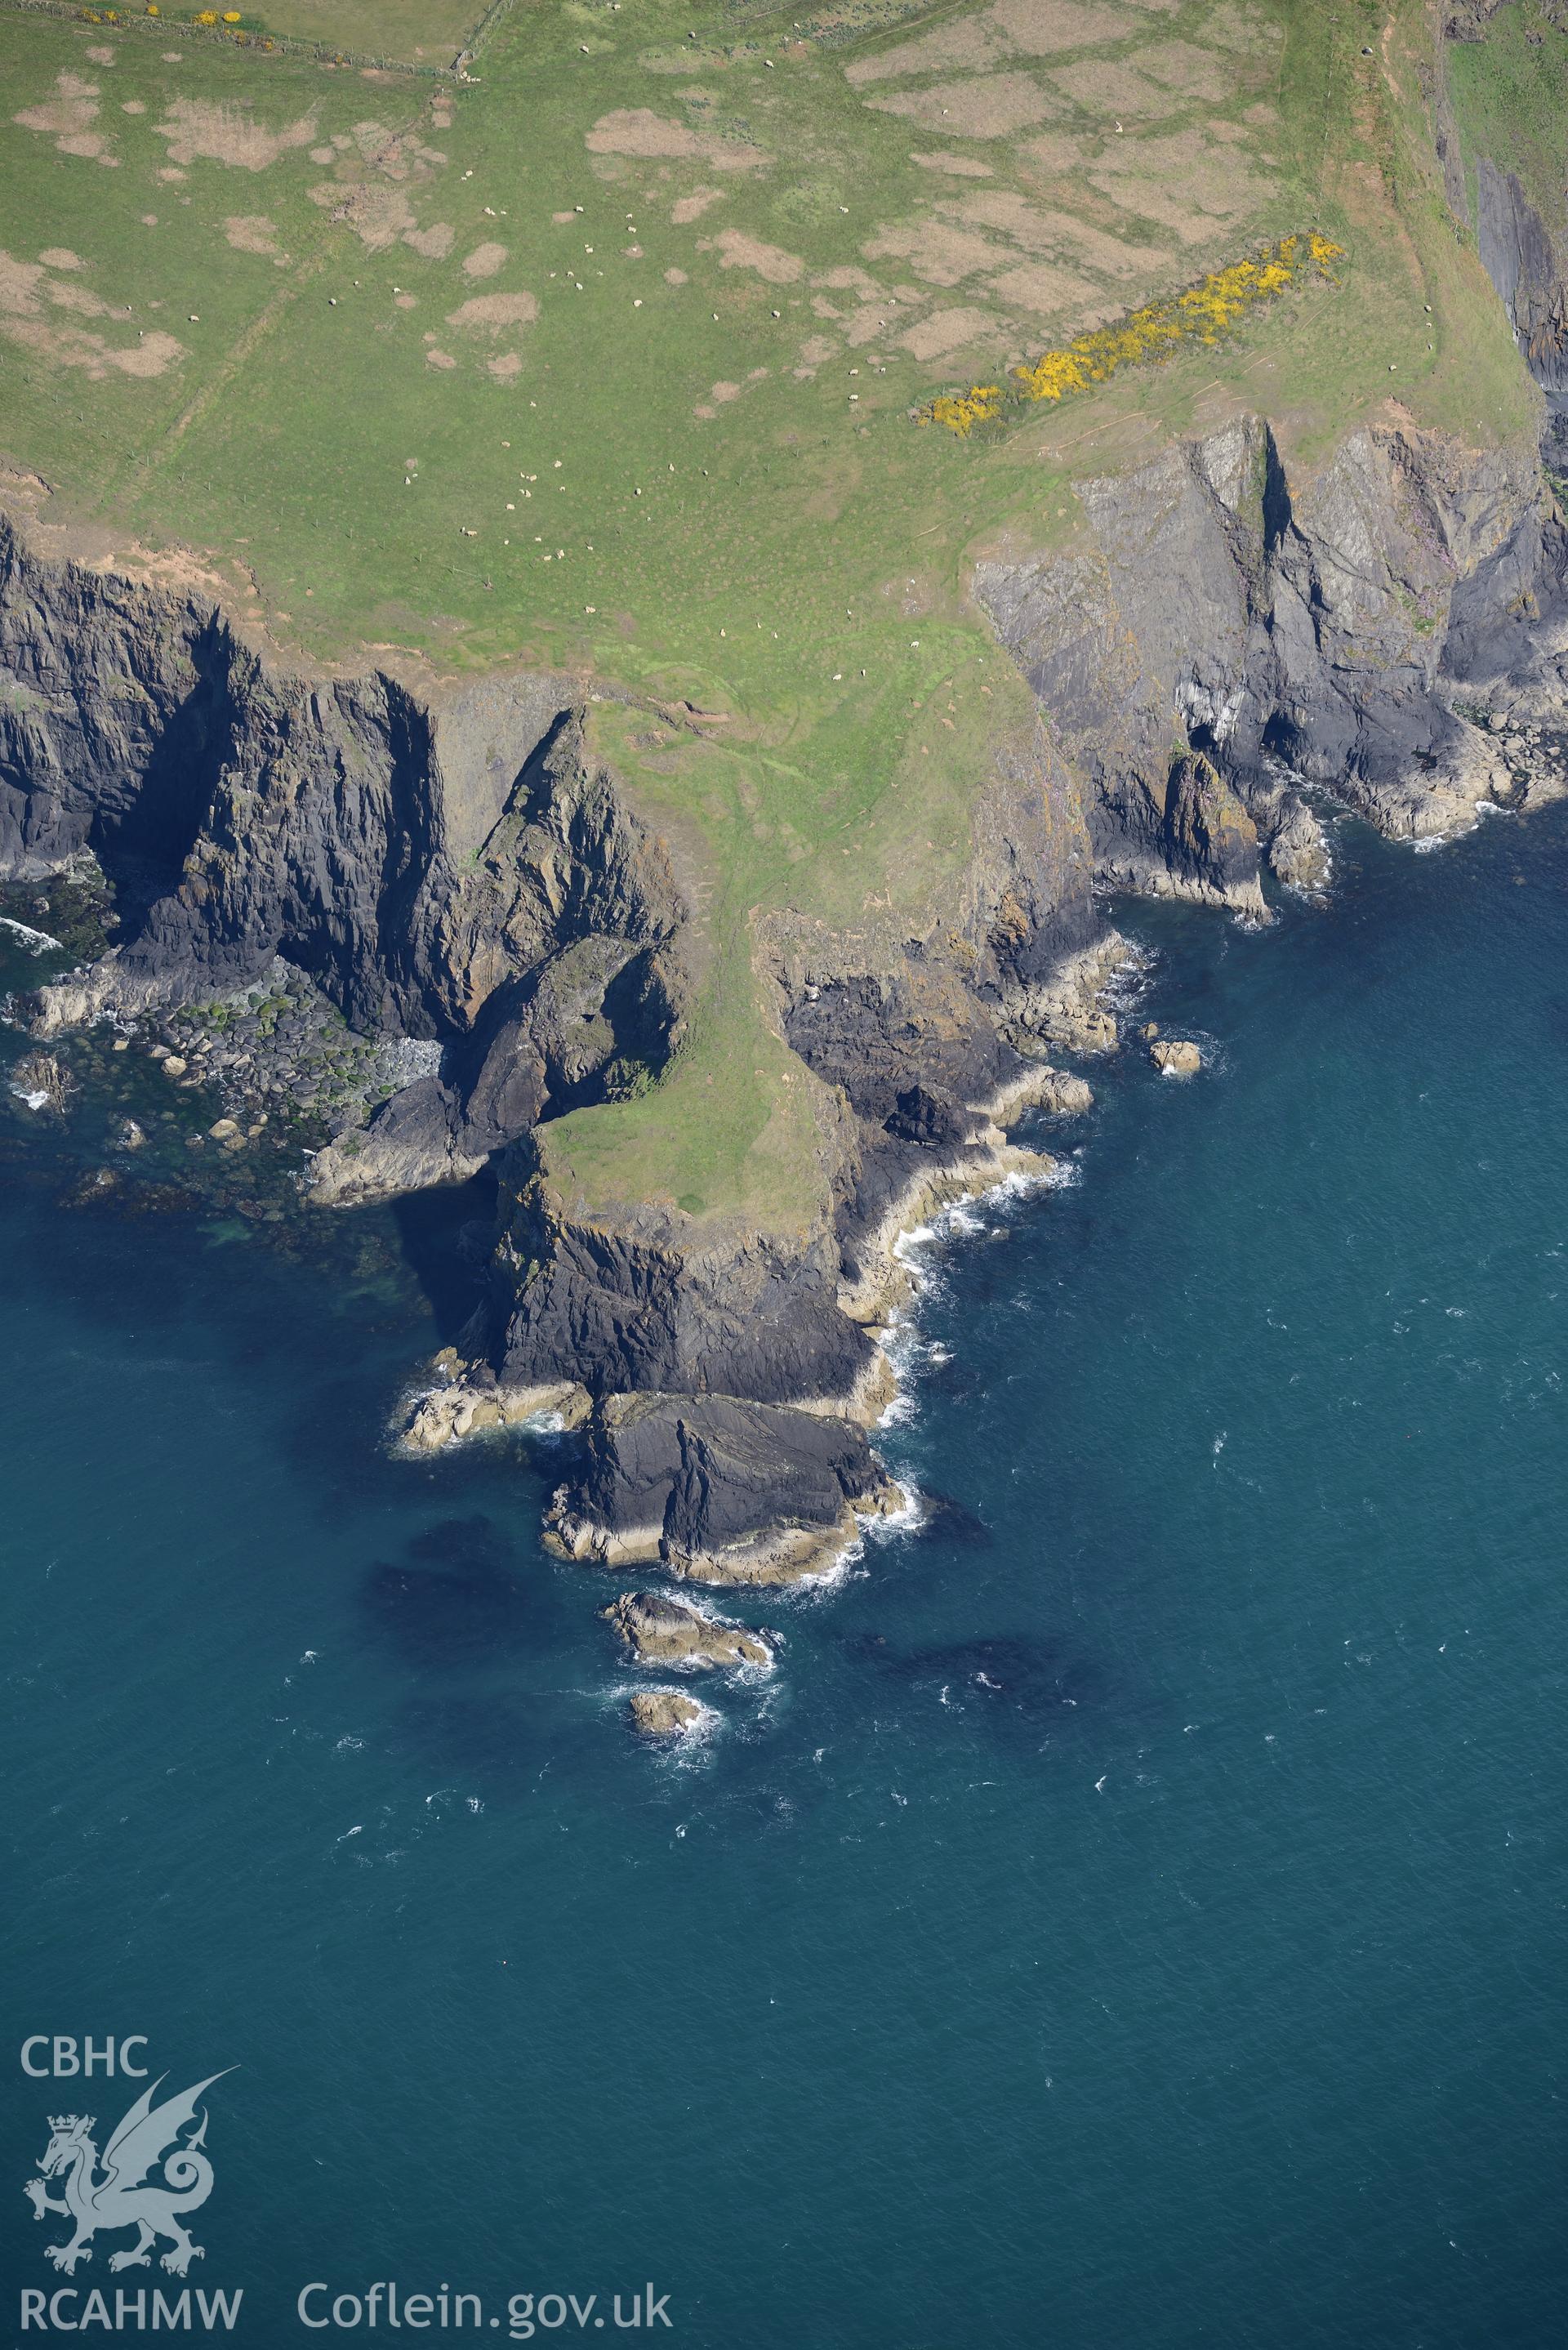 Aerial photography of Trwyn Gwningaer taken on 3rd May 2017.  Baseline aerial reconnaissance survey for the CHERISH Project. ? Crown: CHERISH PROJECT 2017. Produced with EU funds through the Ireland Wales Co-operation Programme 2014-2020. All material made freely available through the Open Government Licence.